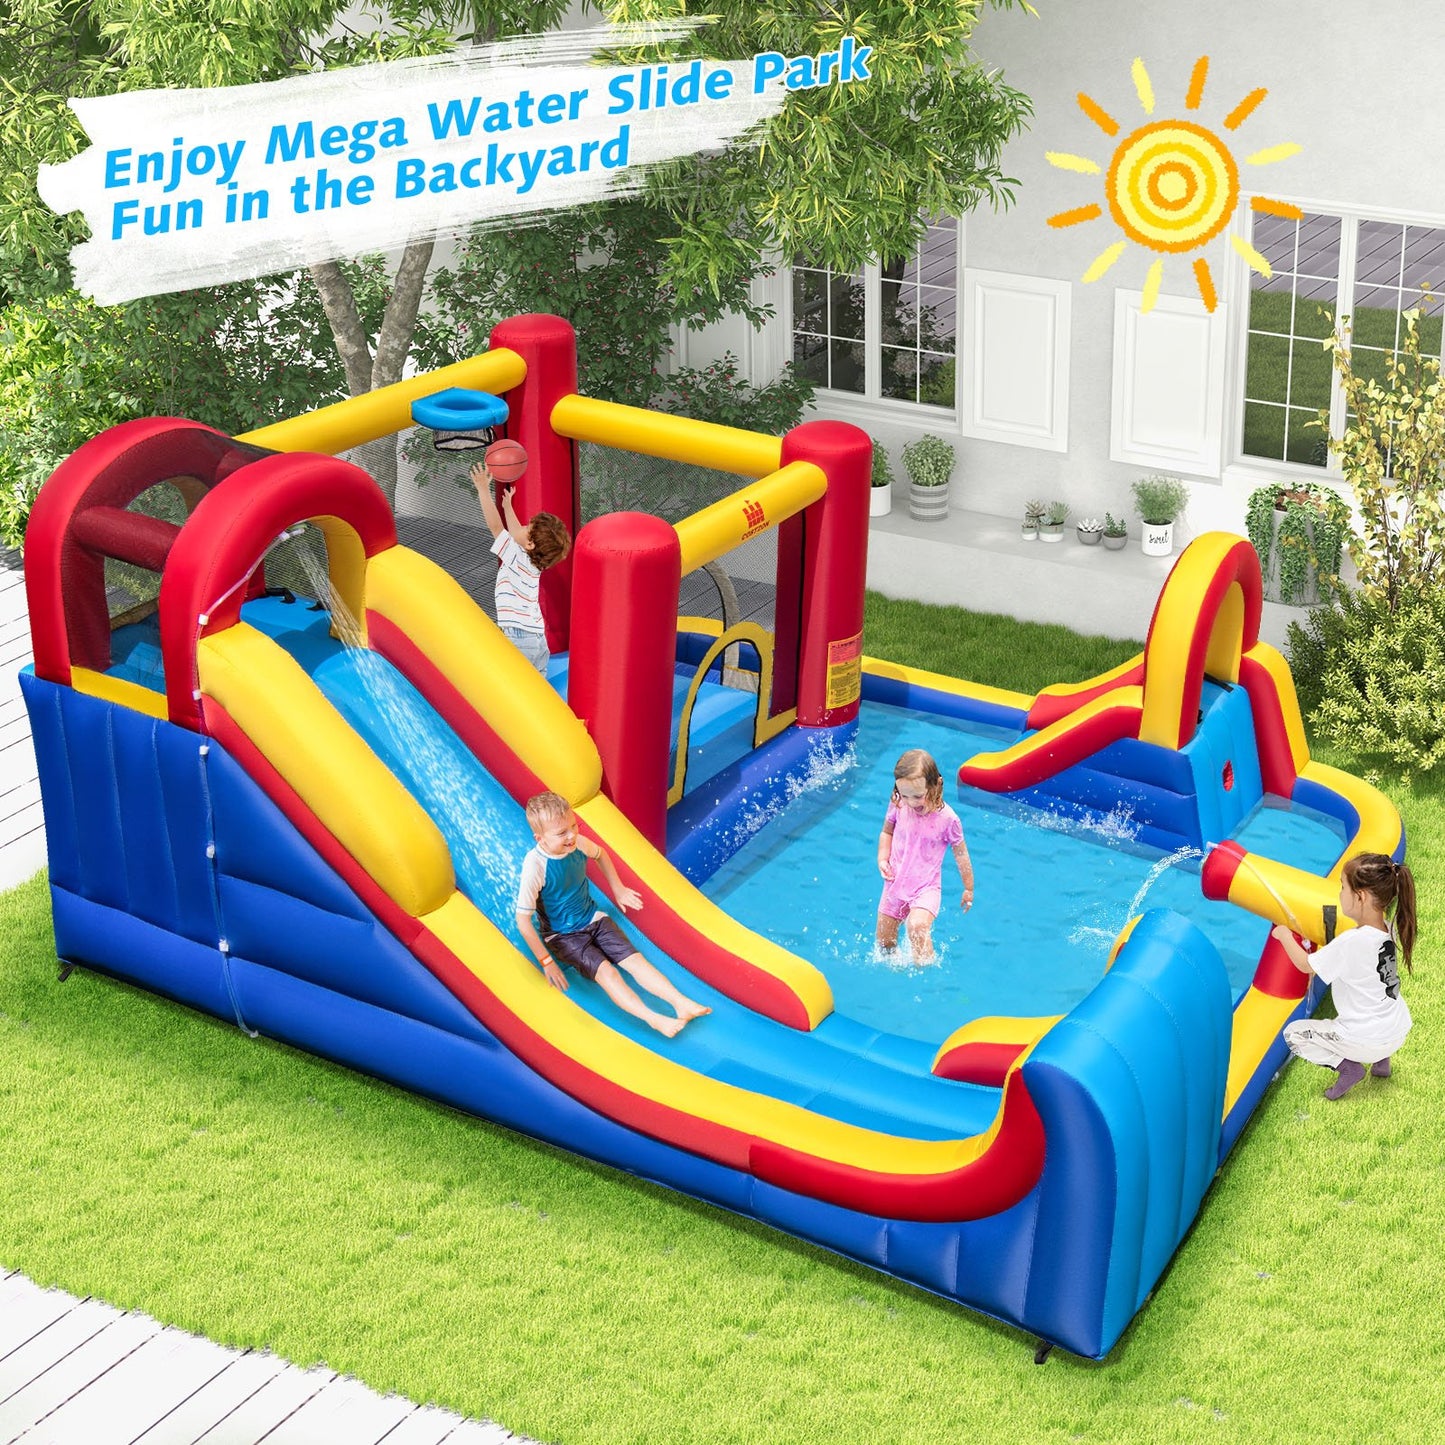 7 in 1 Outdoor Inflatable Bounce House with Water Slides and Splash Pools without Blower, Red